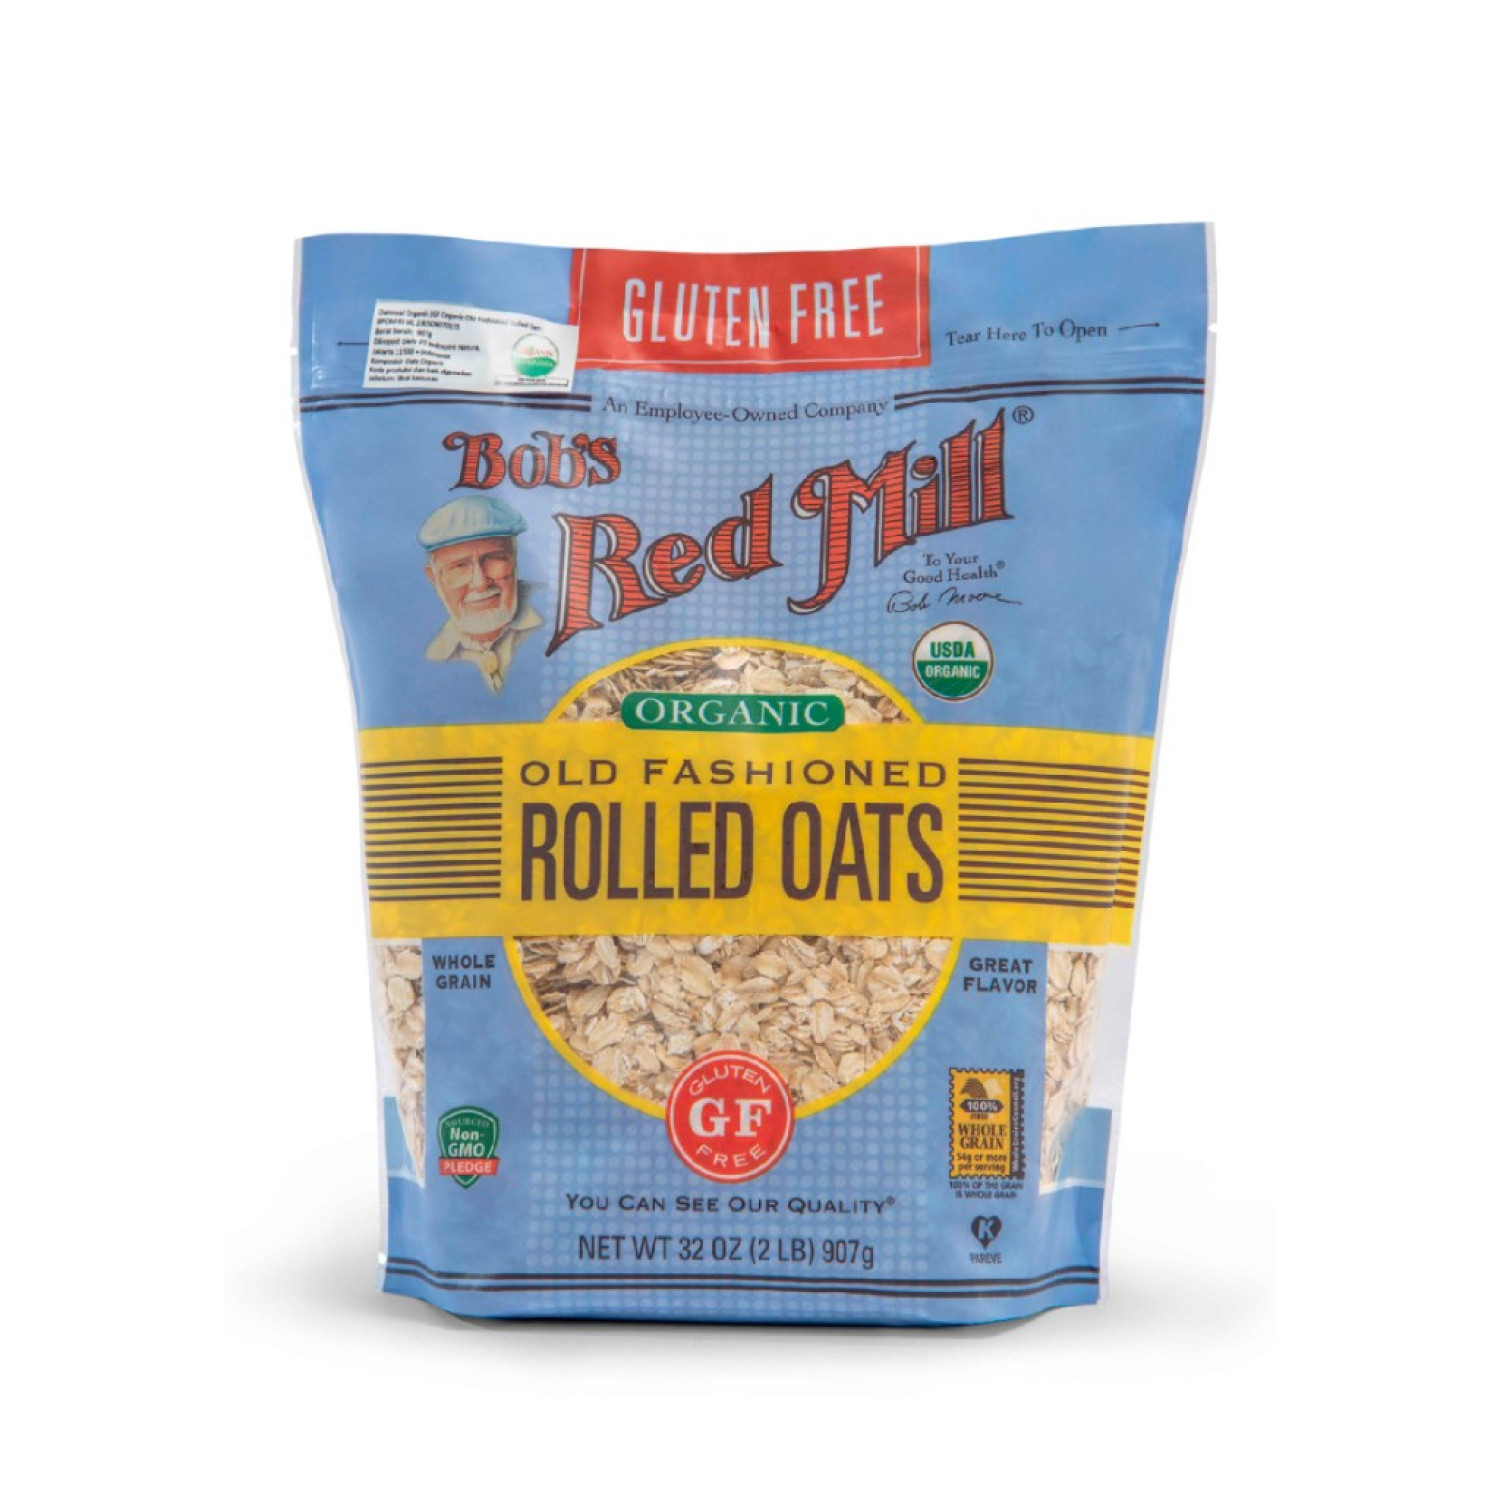 Bob's Red Mill Bob's Red Mill Old Fashioned Rolled Oats